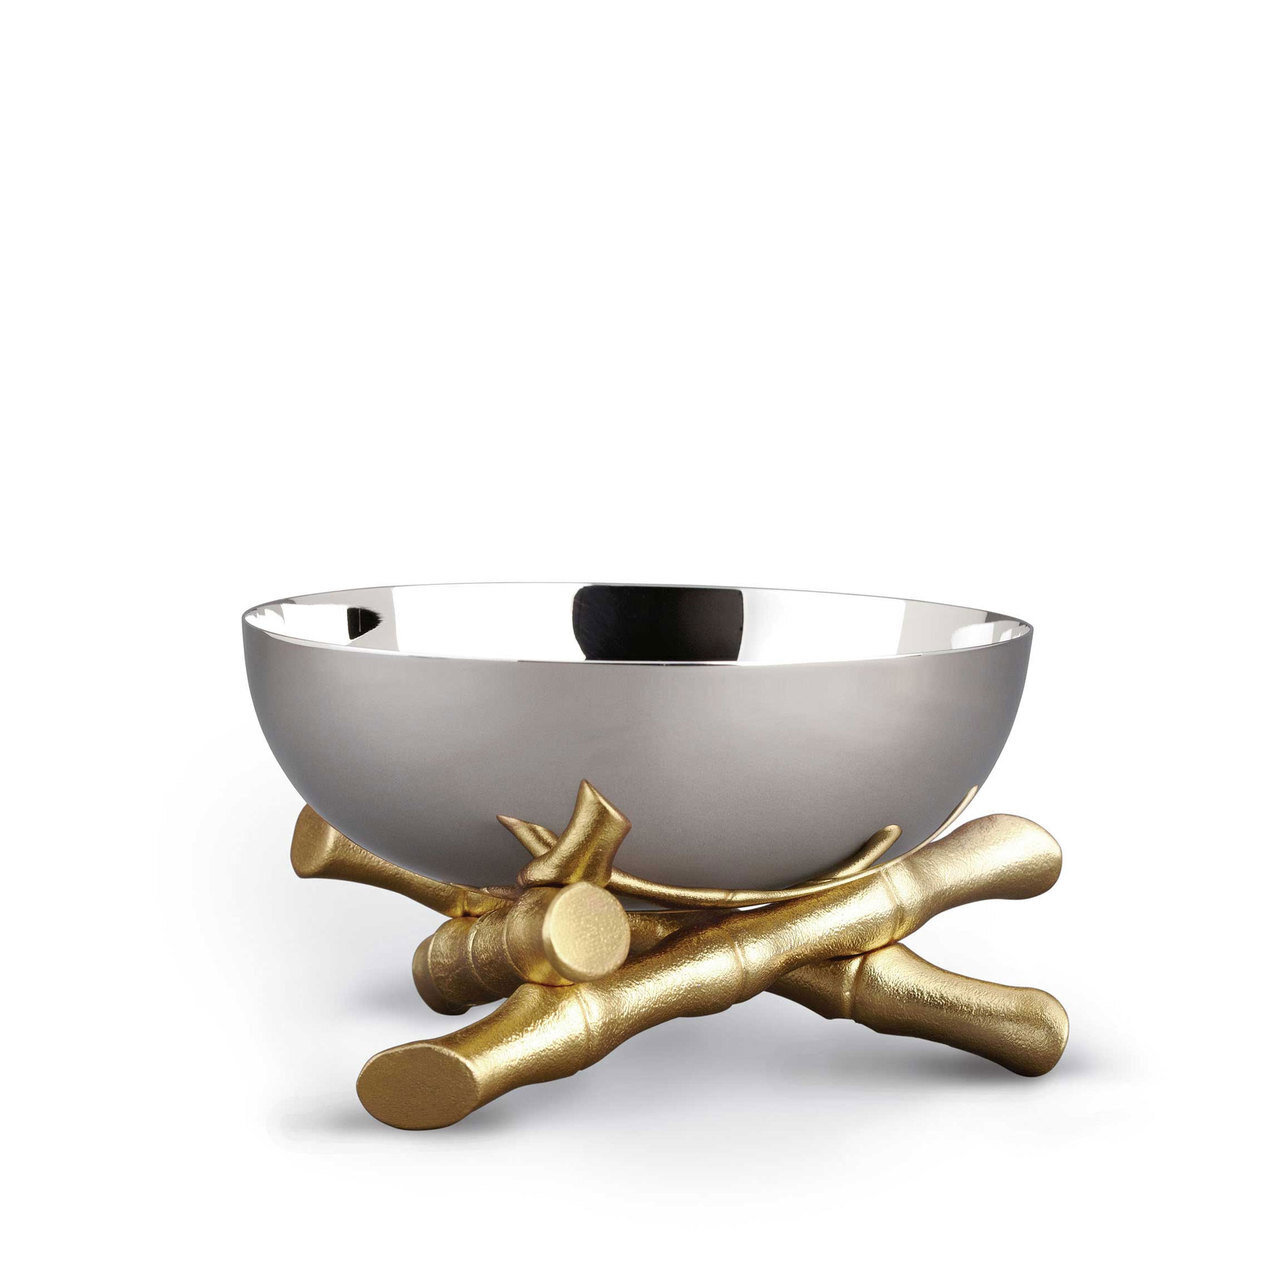 L'Objet Bambou Bowl Medium 24k Gold-Plated Stainless Steel